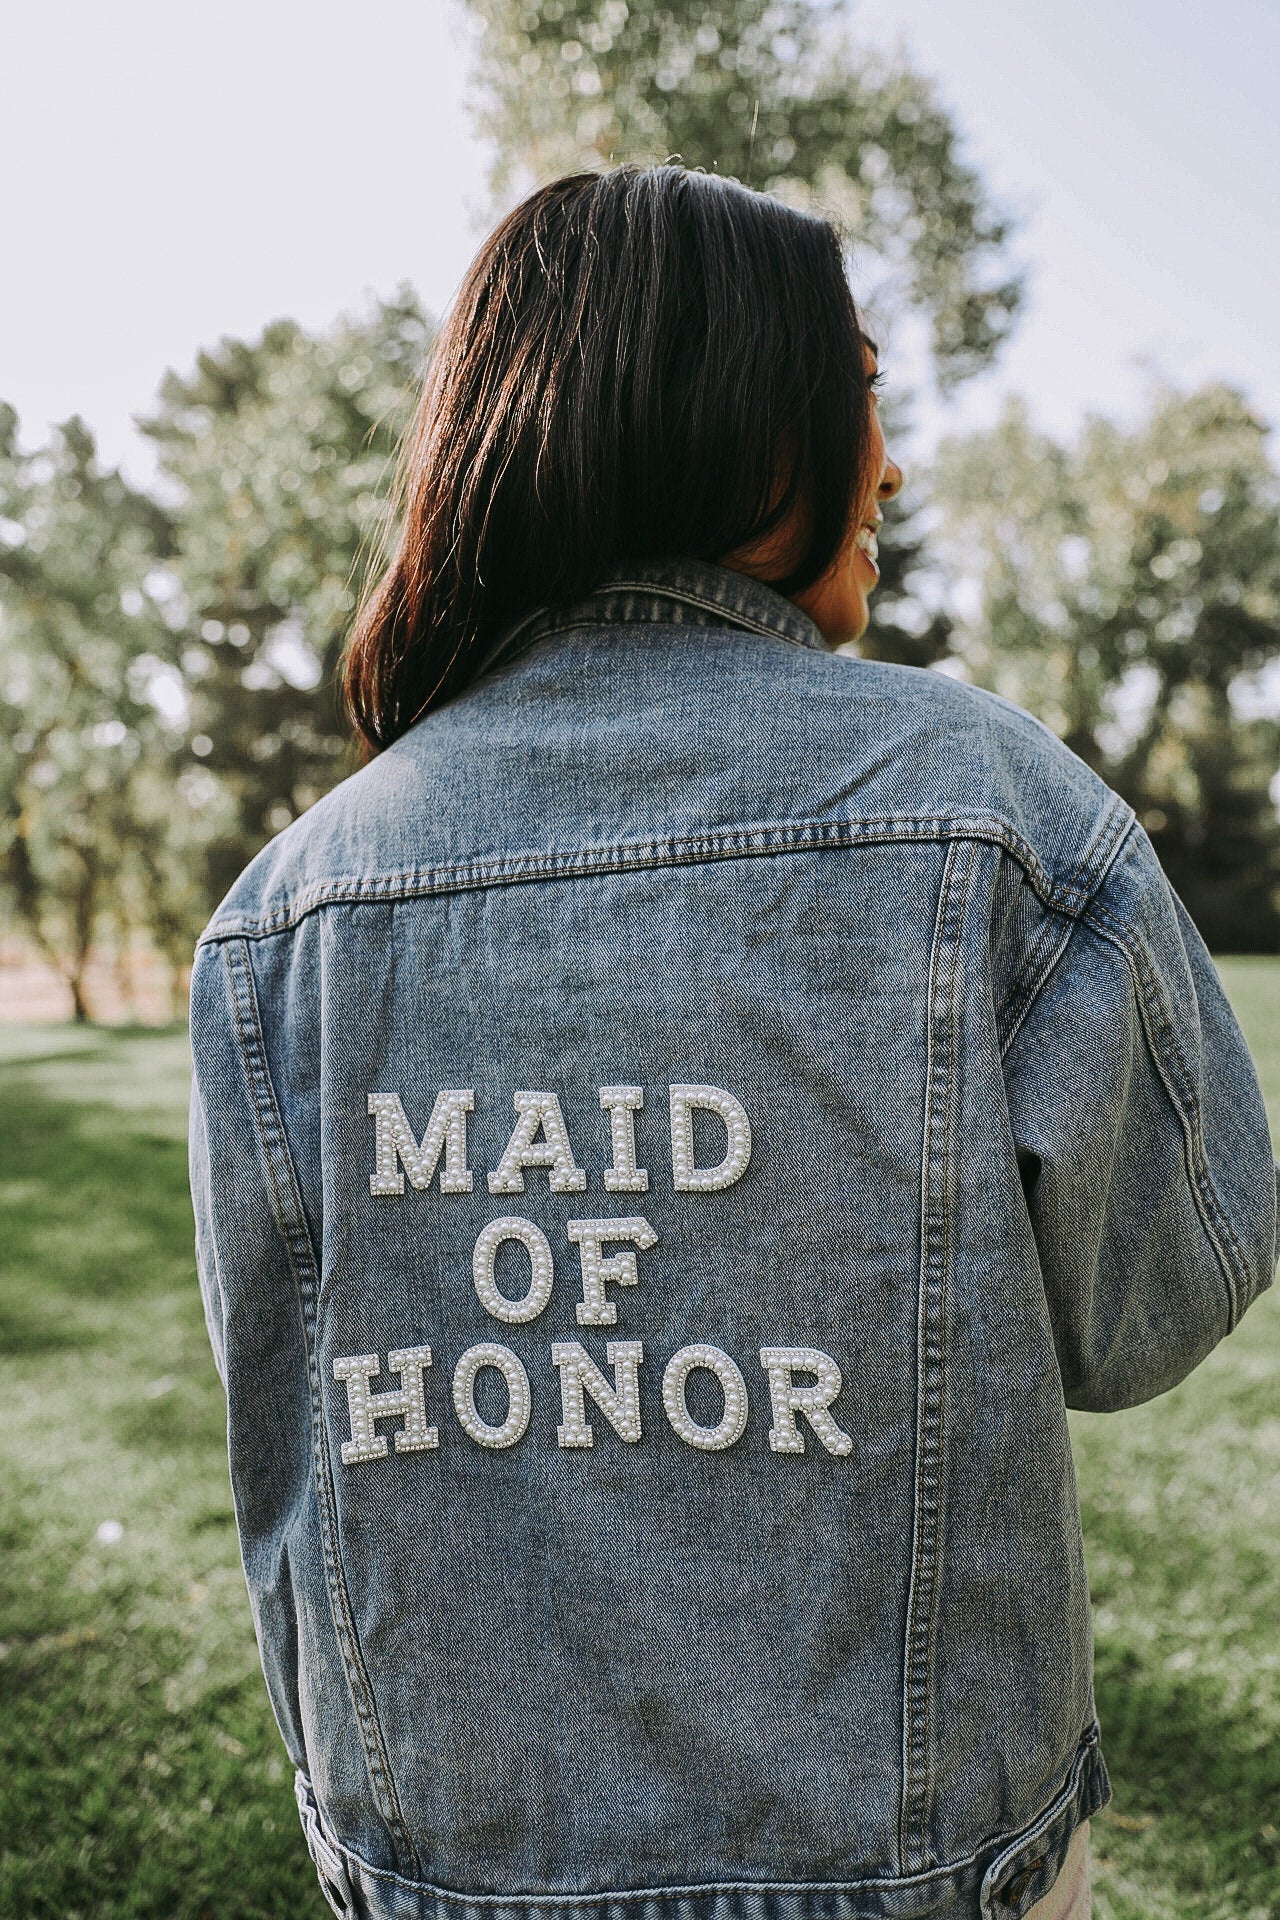 personalized jacket for maid of honor.